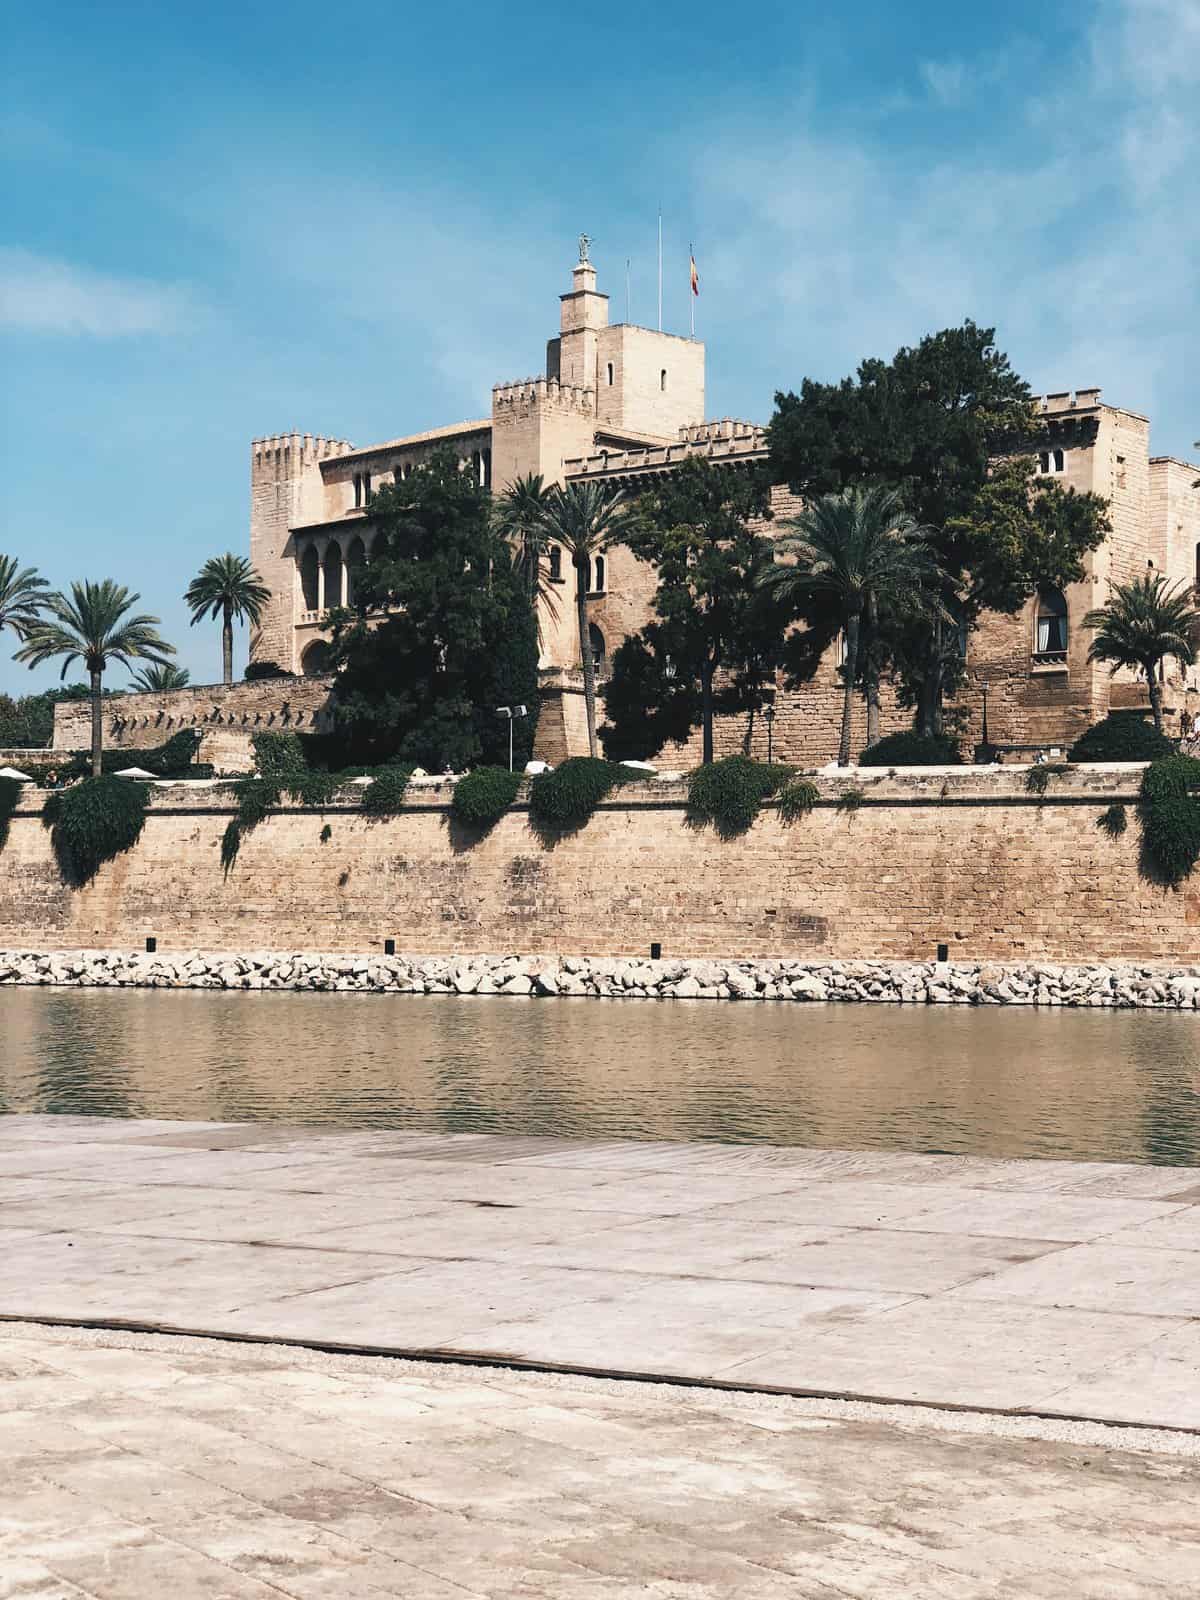 How to Spend 1 day in Palma de Mallorca: What to Do & Itinerary